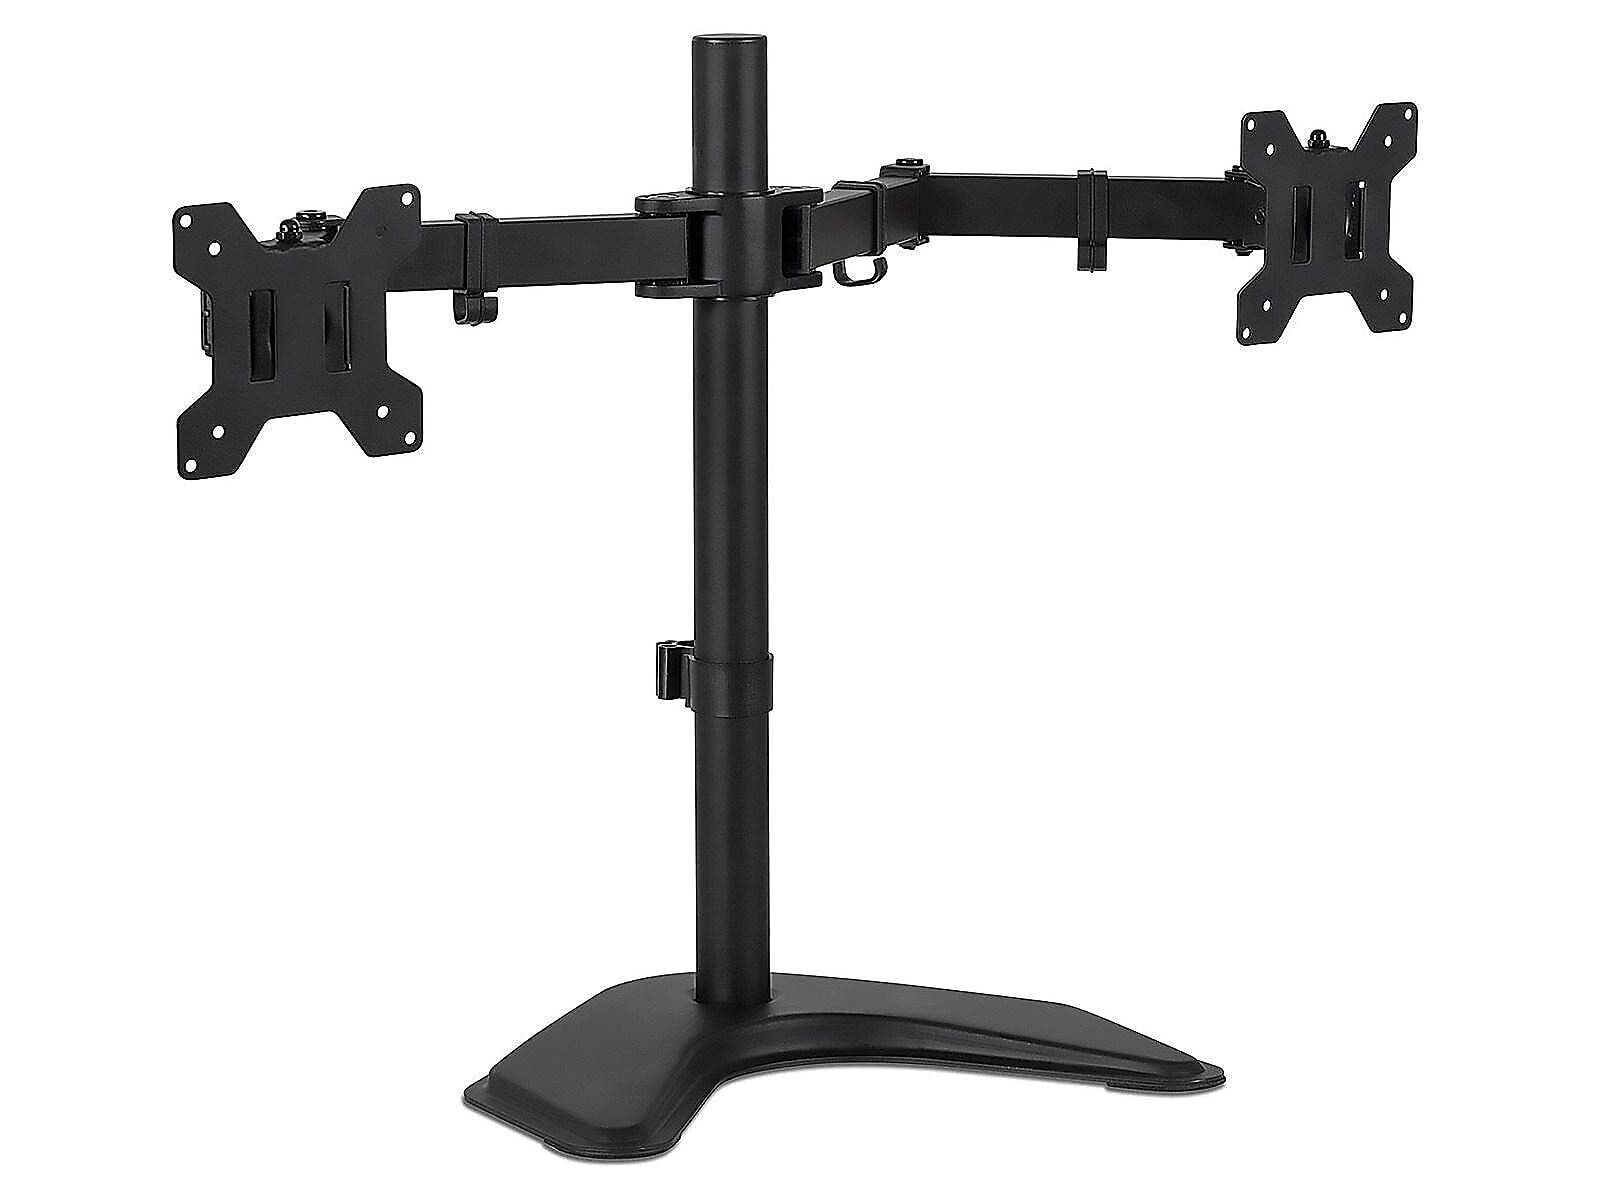 Mount-It Dual Monitor Stand for Desk - Double Monitor Mount for 2 Screens up...